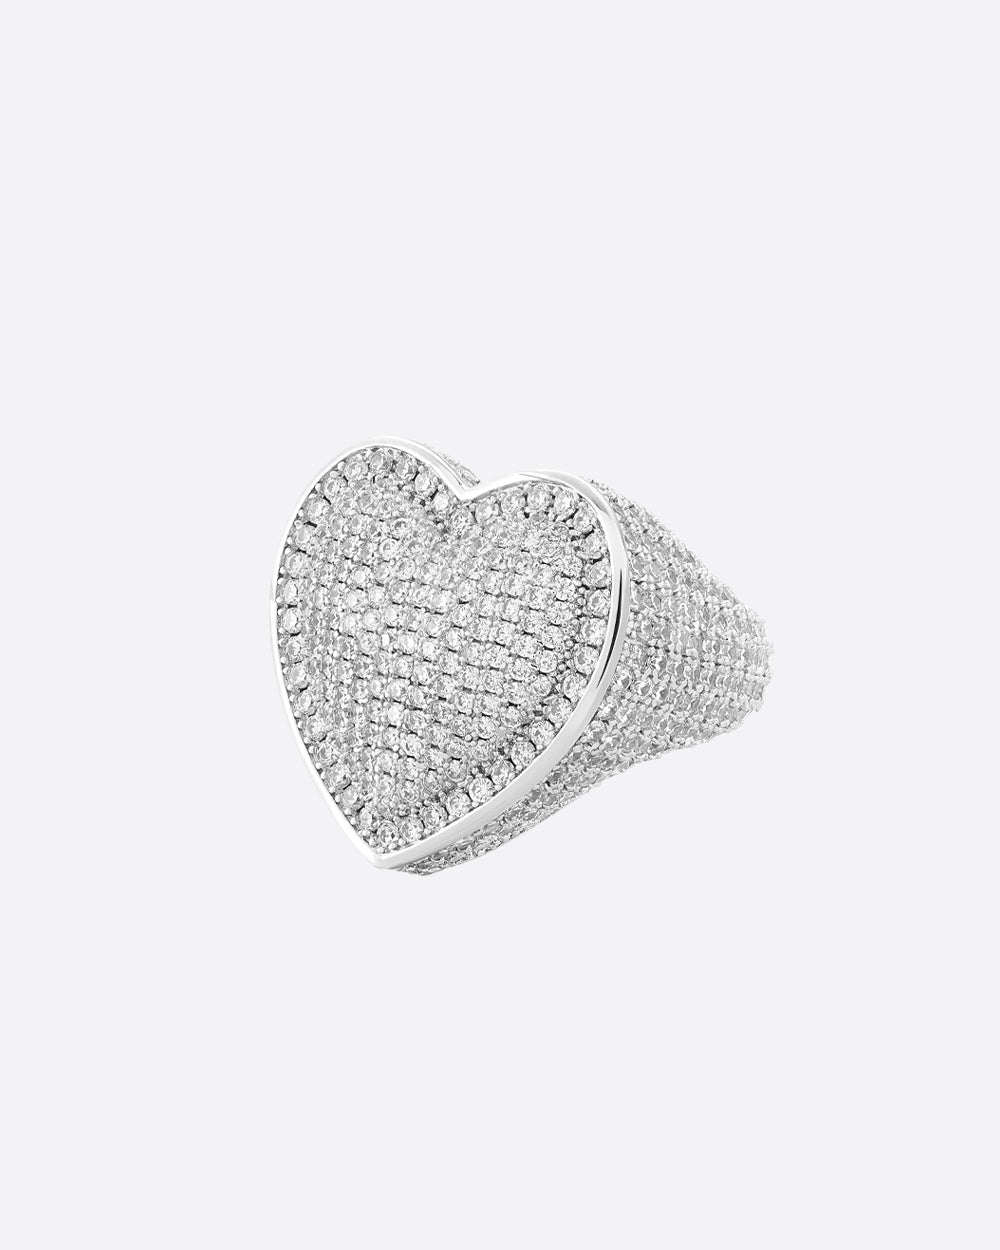 ICY PAVED HEART RING. - WHITE GOLD - Drippy Amsterdam